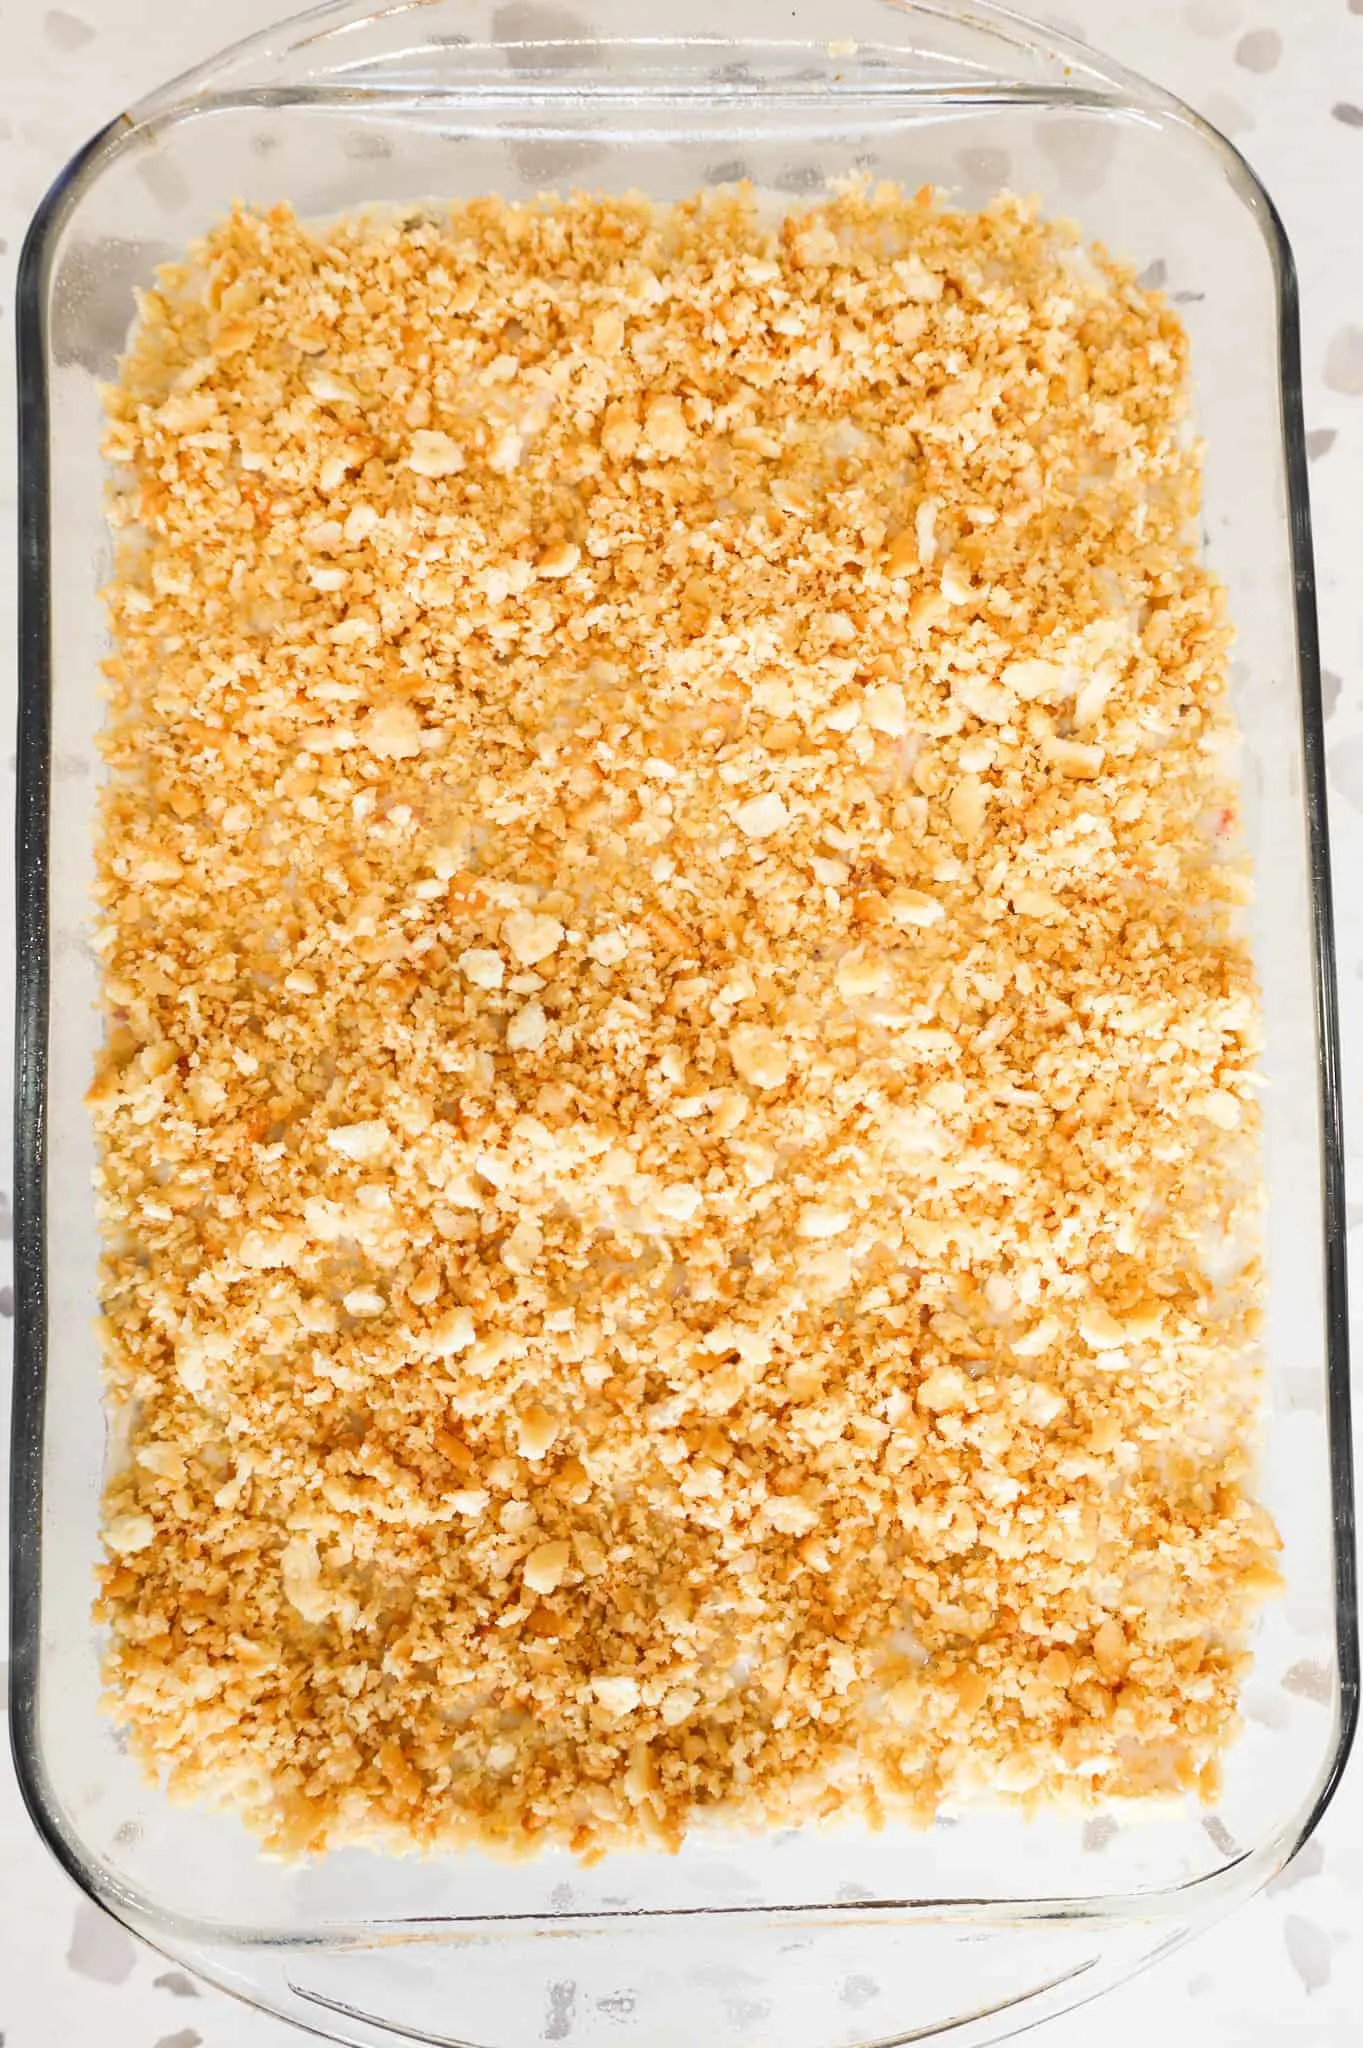 Ritz cracker crumbs sprinkled on top of chicken and rice casserole